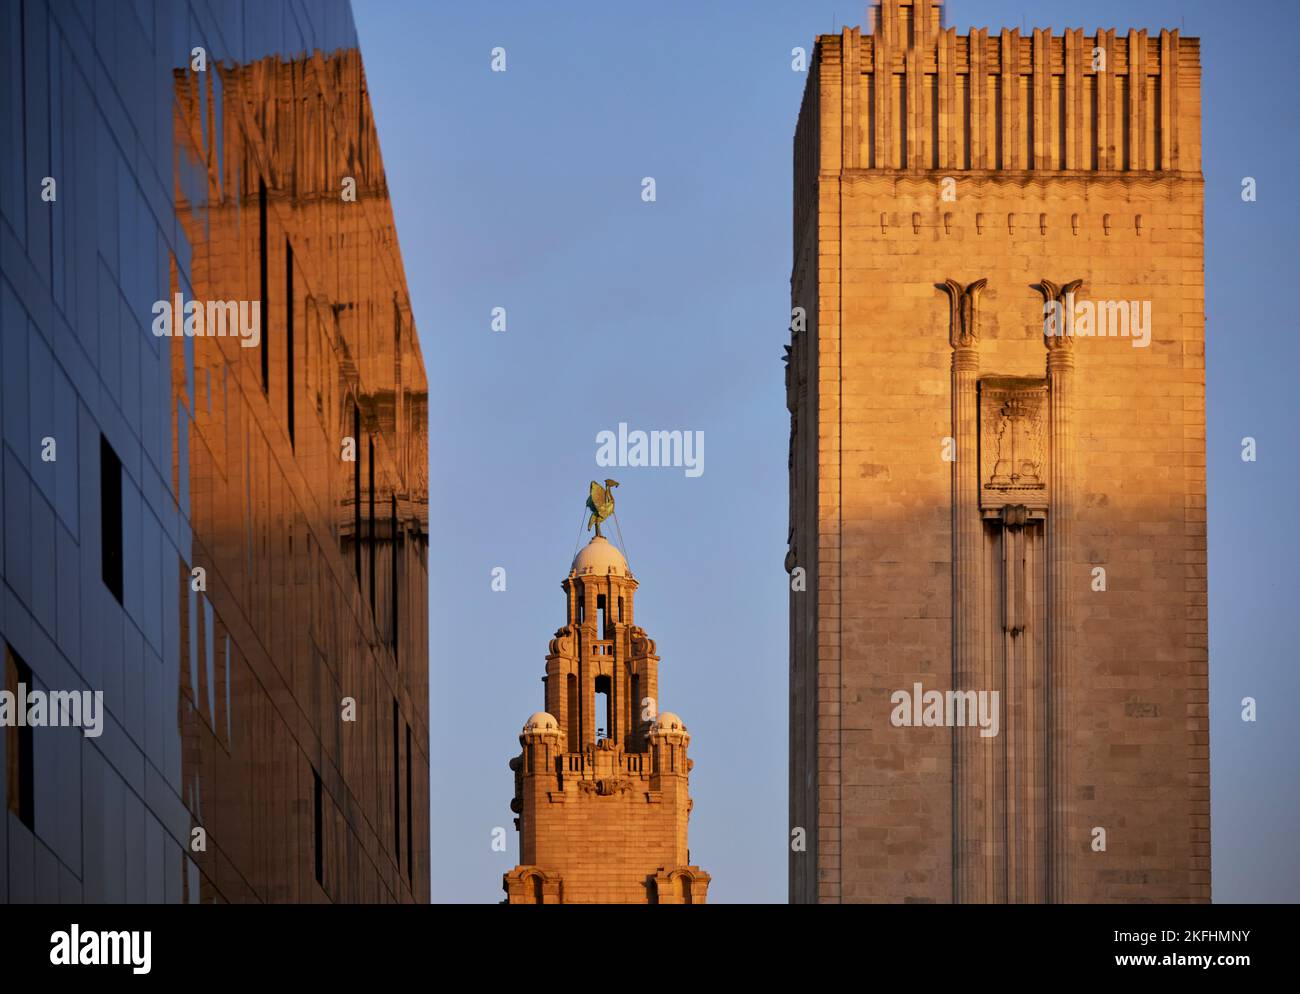 The Royal Liver Building Grade I listed building in Liverpool, England. Stock Photo